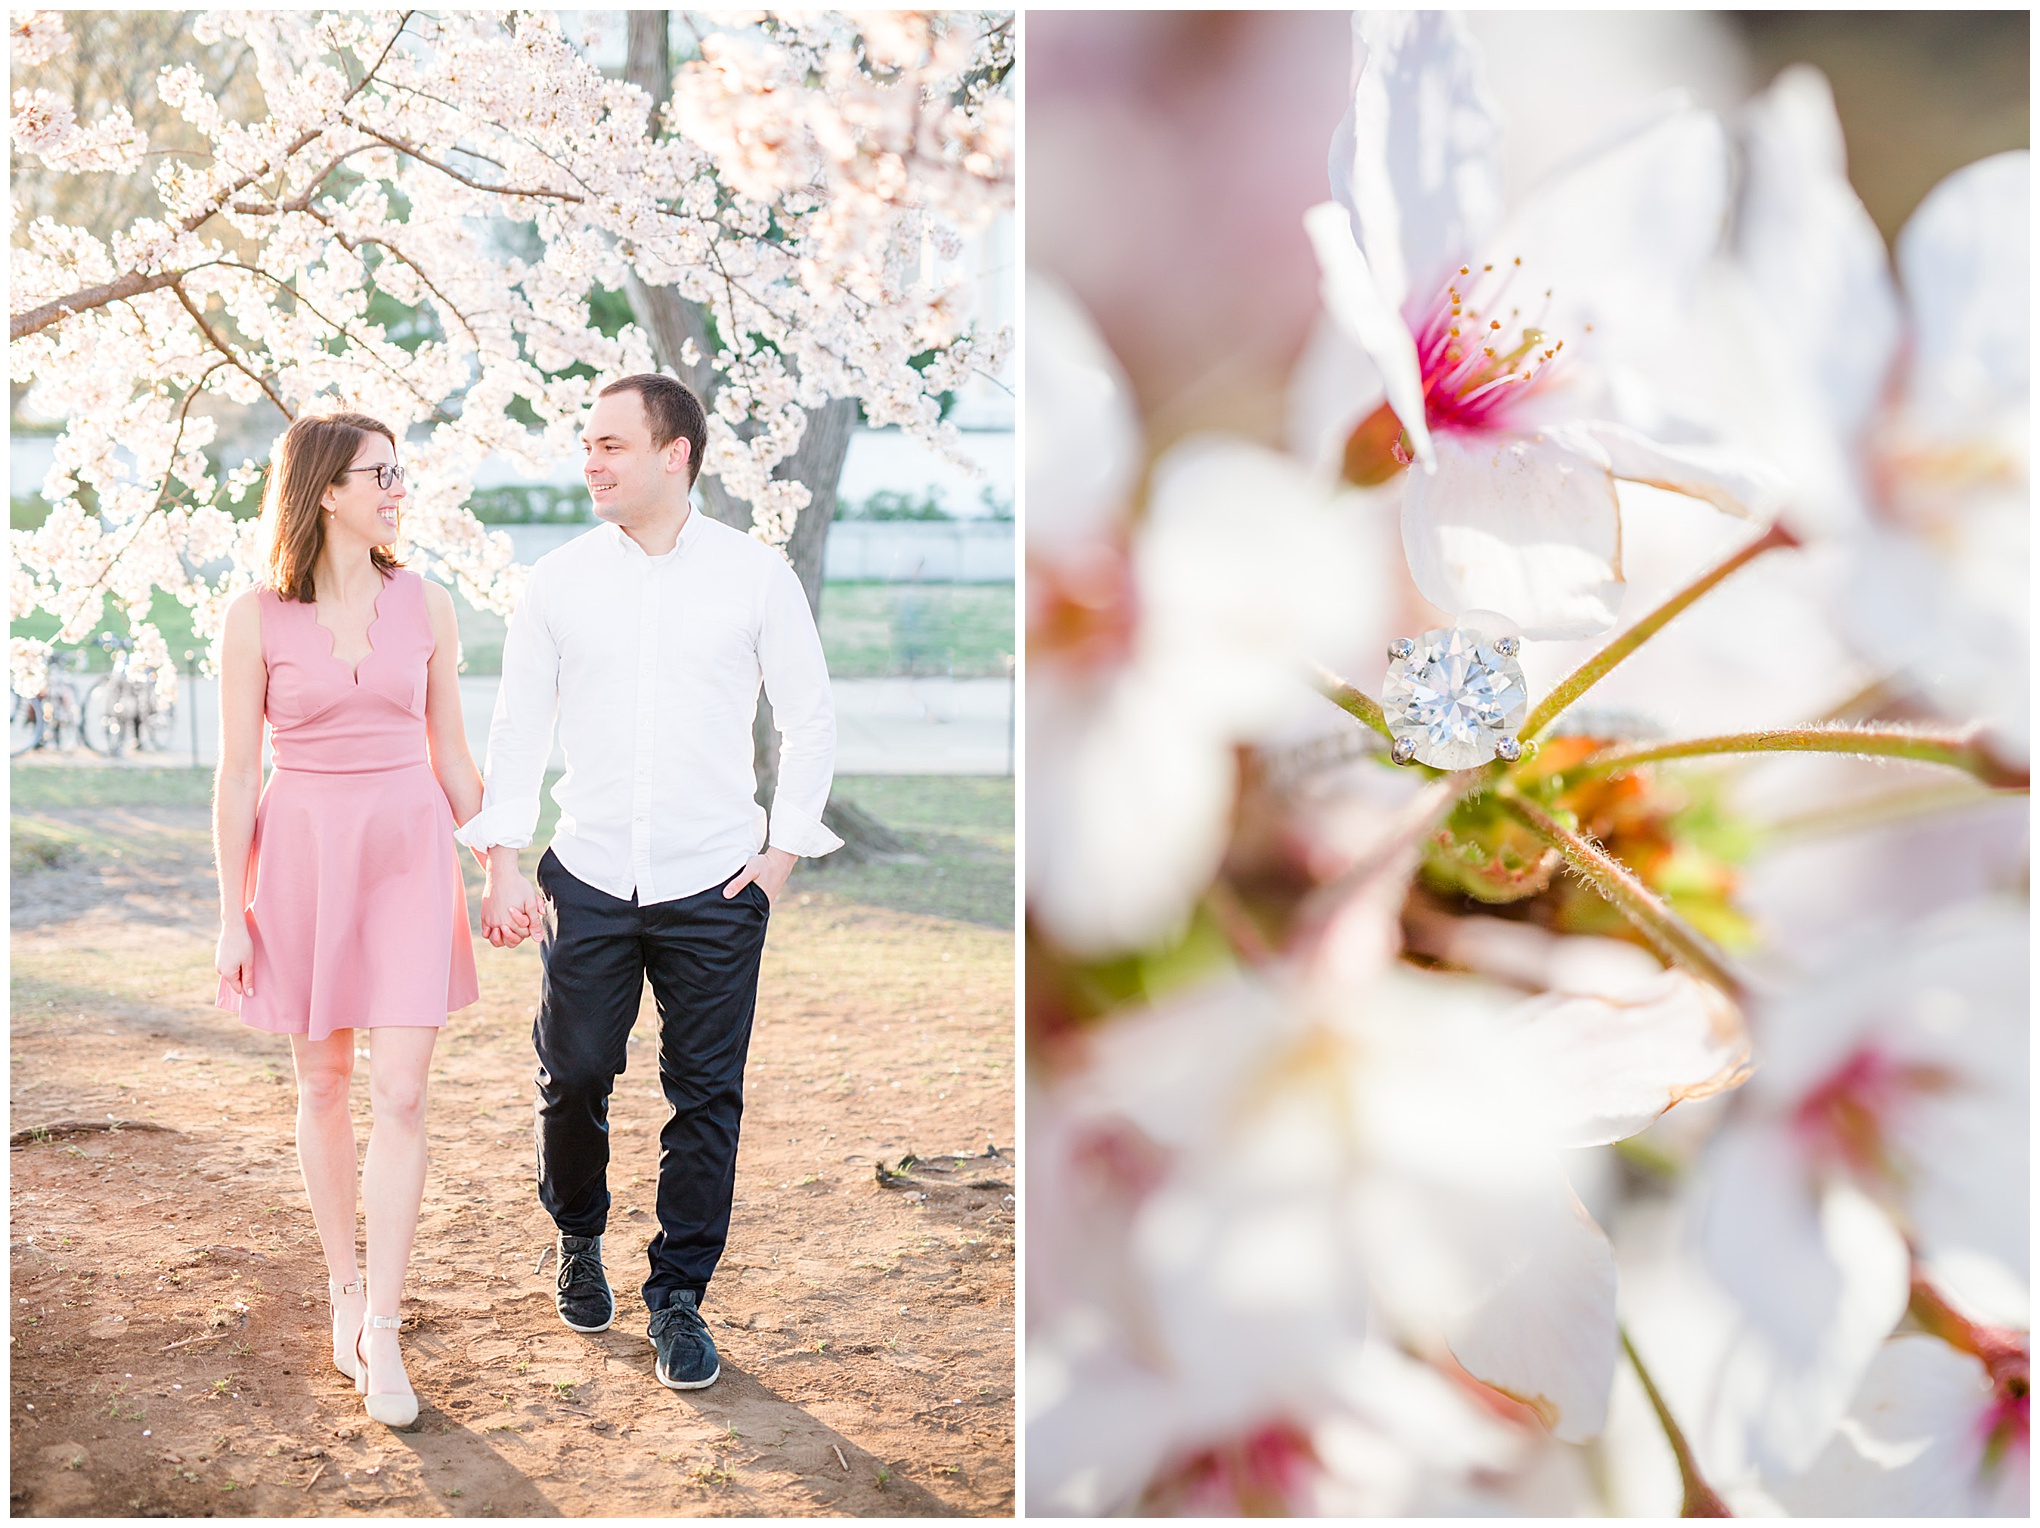 sunny cherry blossoms engagement session, Washington, D.C. engagement photos, Washington D.C. engagement photos, sunrrise engagement photos, cherry blossom engagement photos, D.C. cherry bloossoms, D.C. cherry blossoms photos, cherry blossom photos, cherry blossoms portrraits, sunny engagement photos, classic engagement photos, Rachel E.H. Photography, engagement session style, couple walking, brilliant cut engagement ring